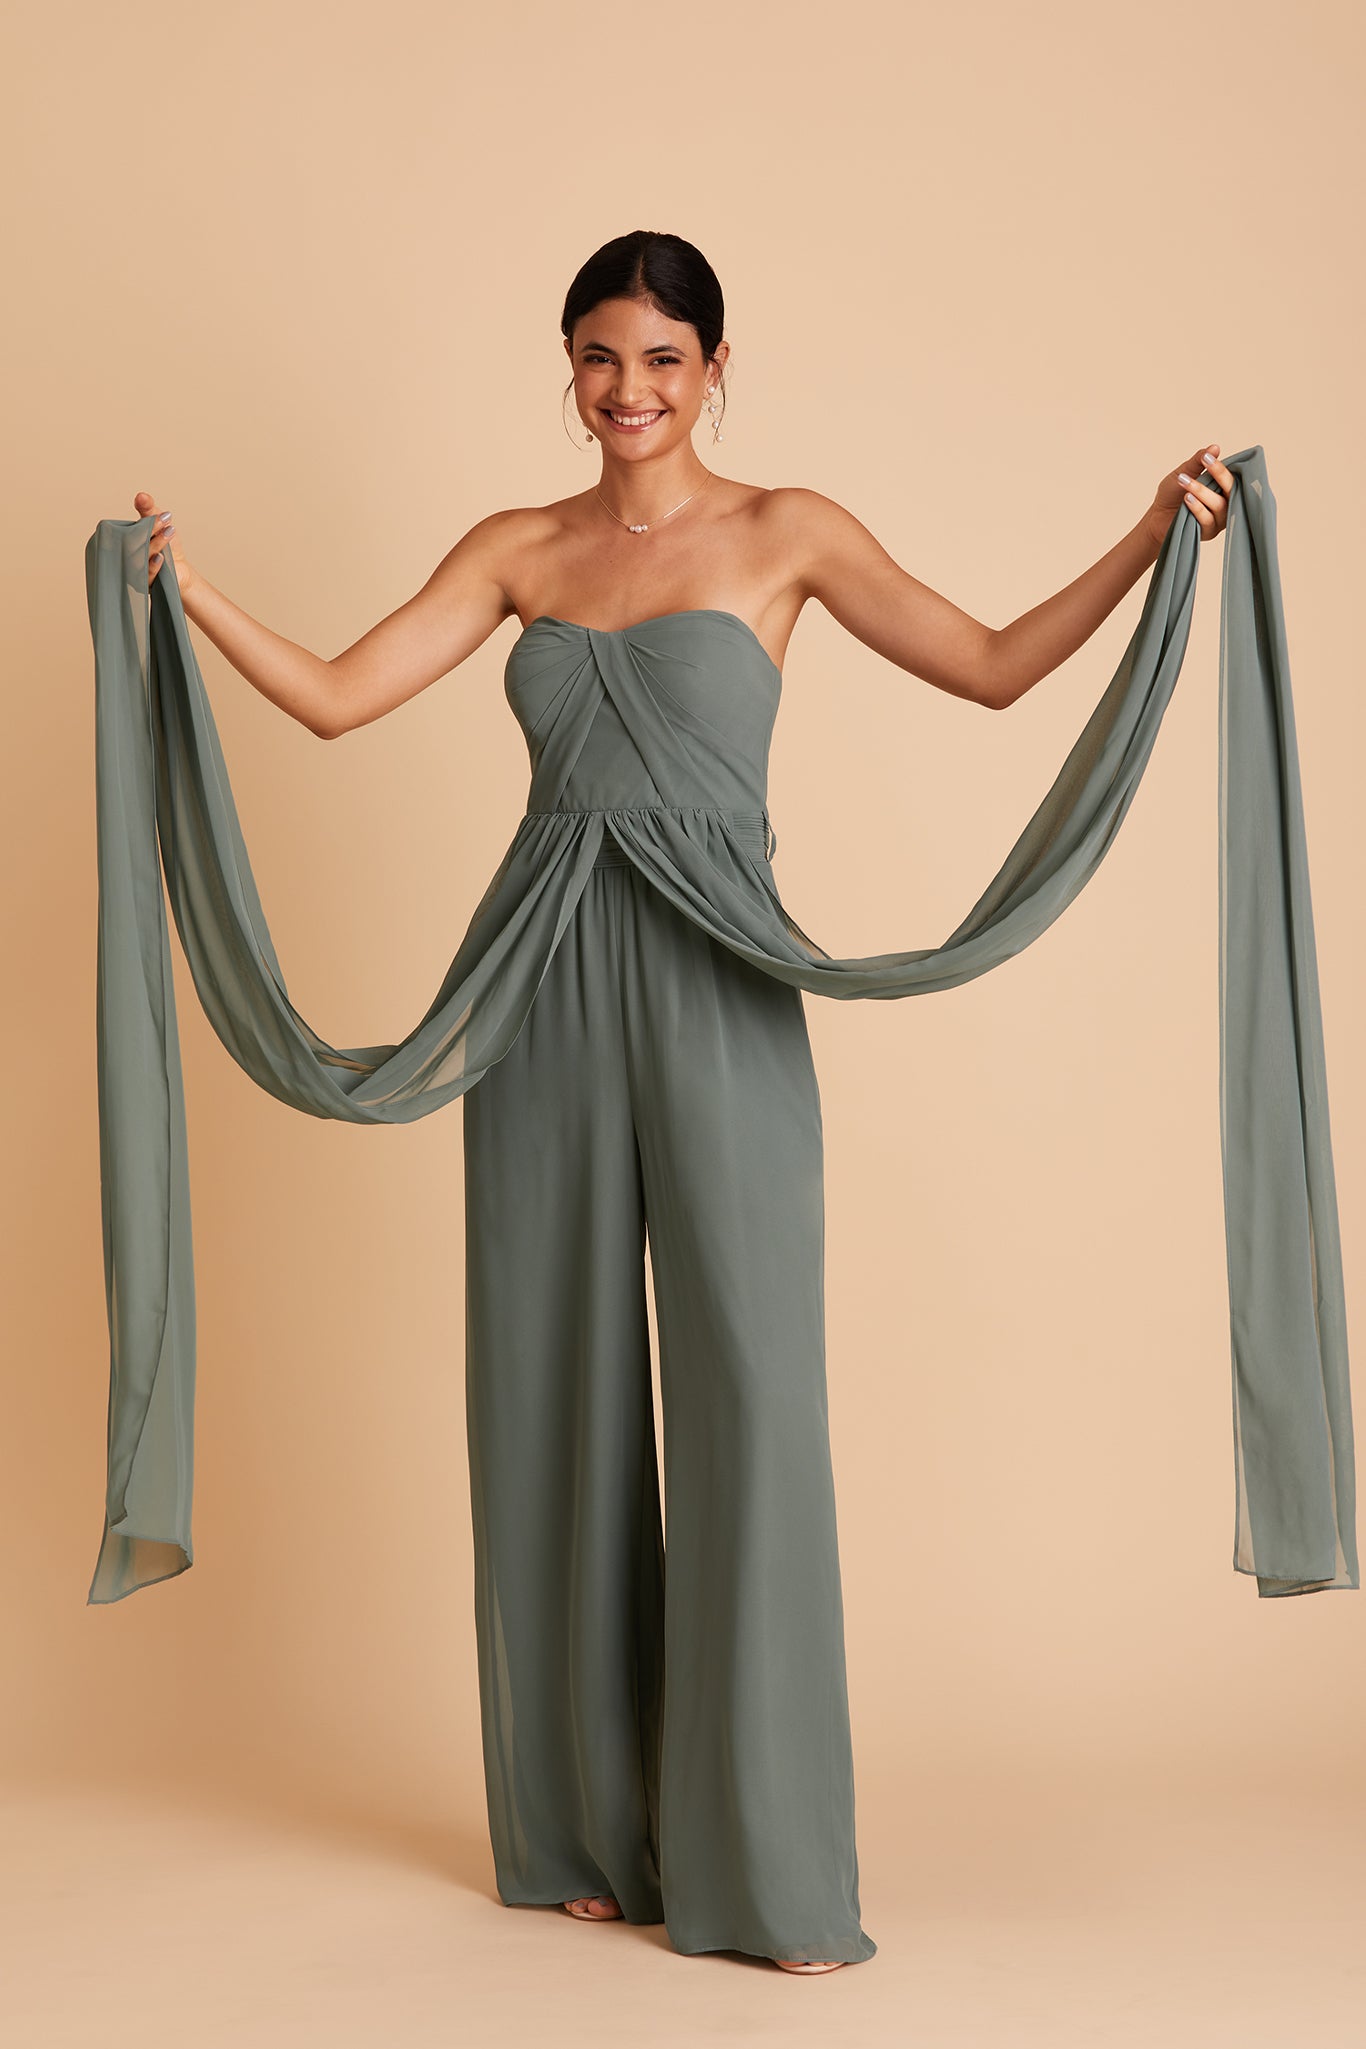 Gigi convertible jumpsuit in sea glass chiffon by Birdy Grey, front view